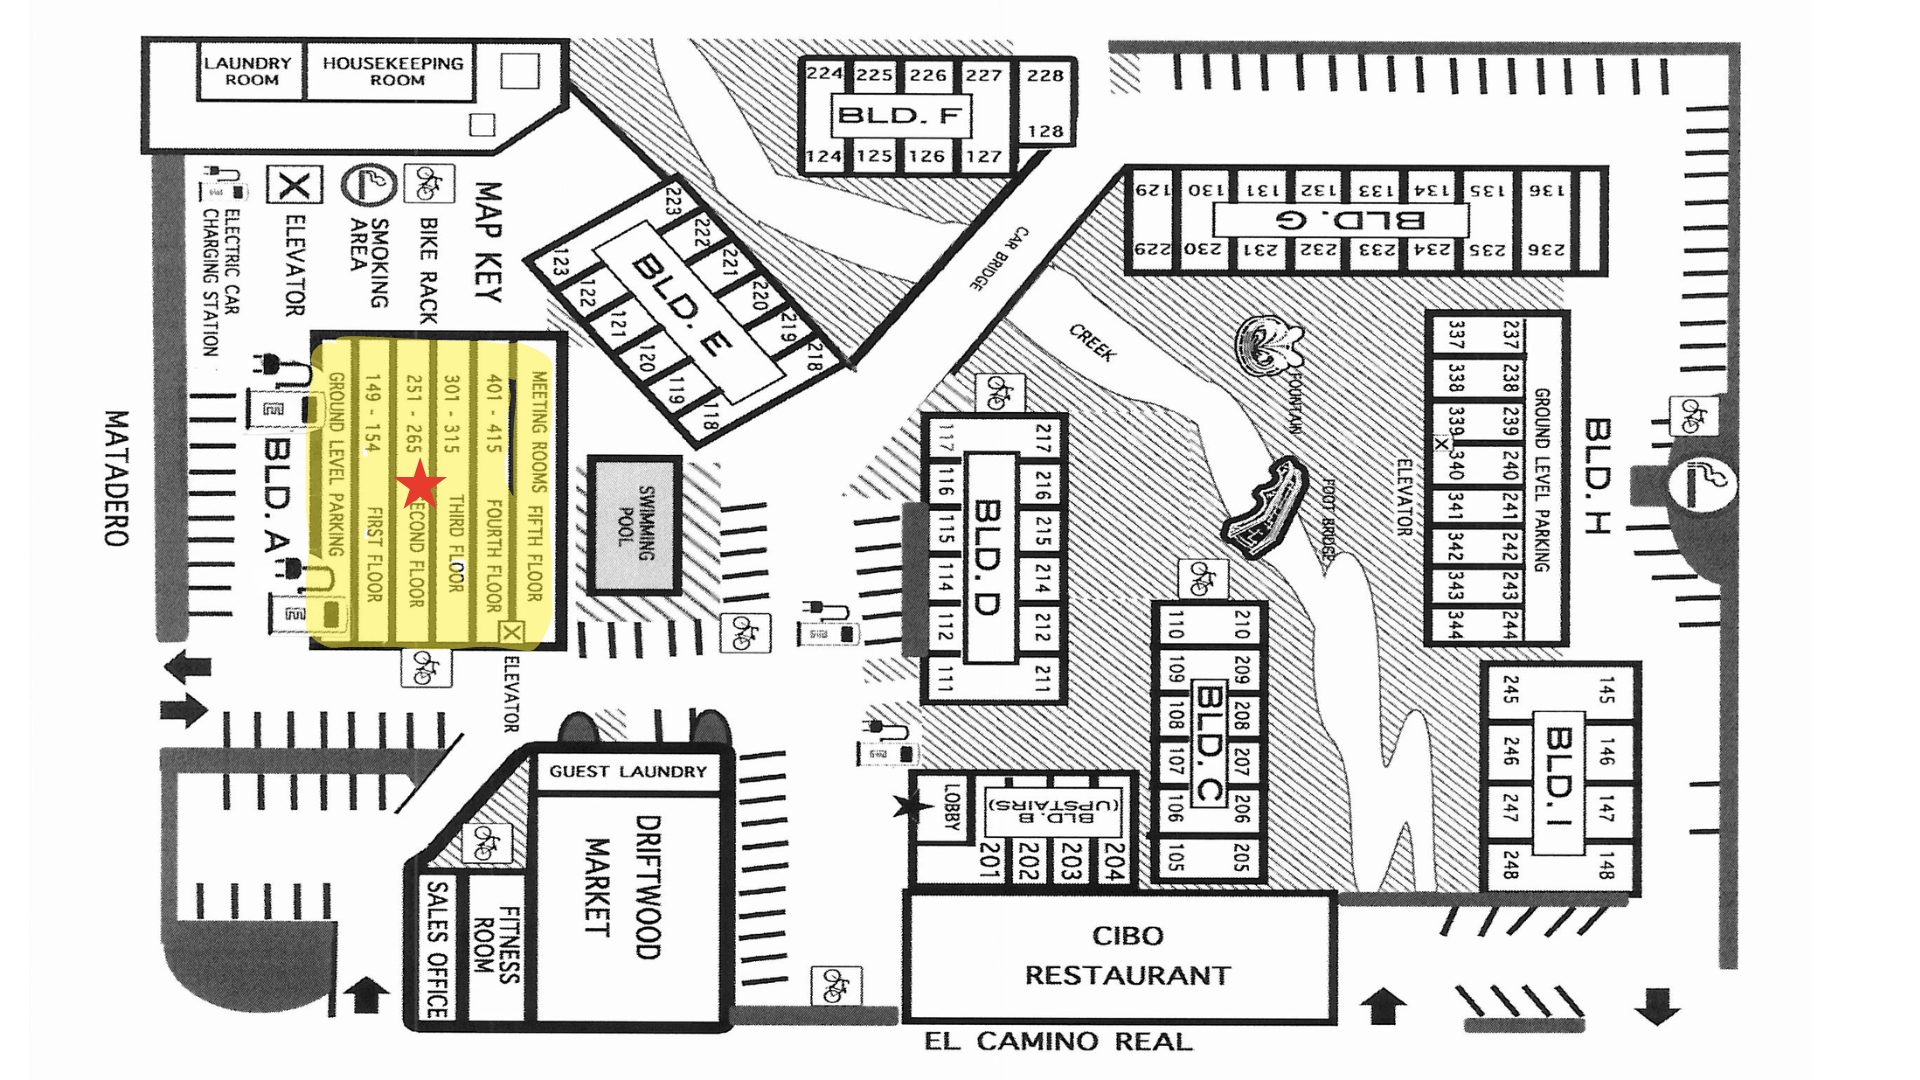 Hotel Map with Building A Highlighted